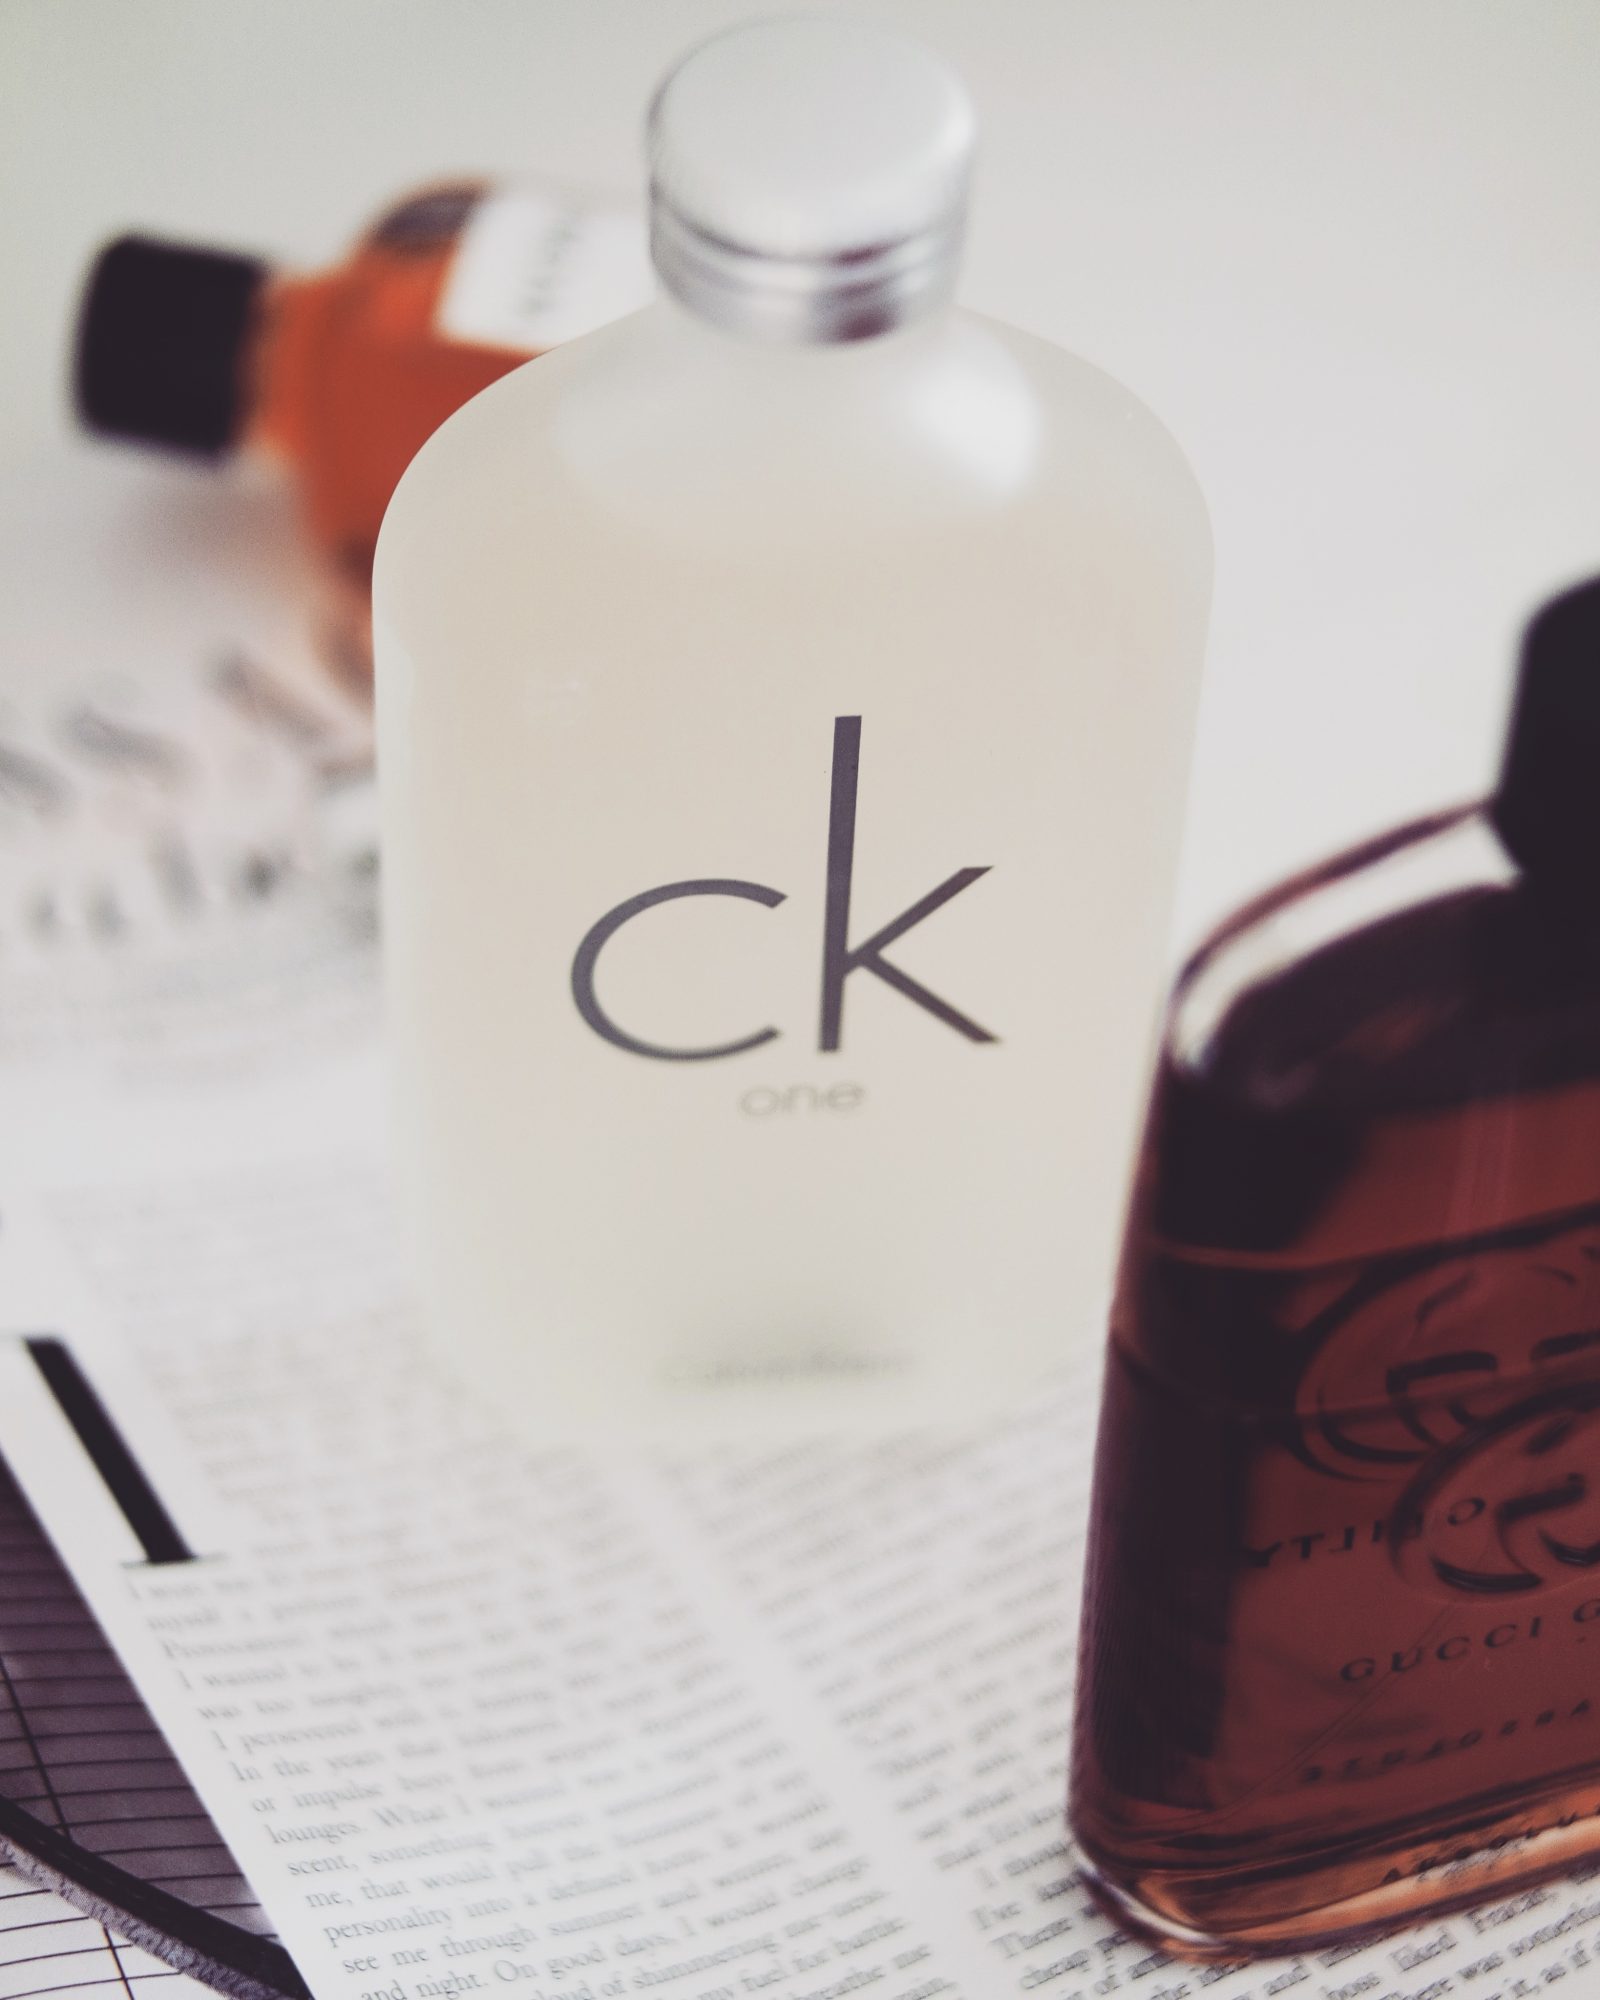 Fathers Day - CK One Mens Aftershave